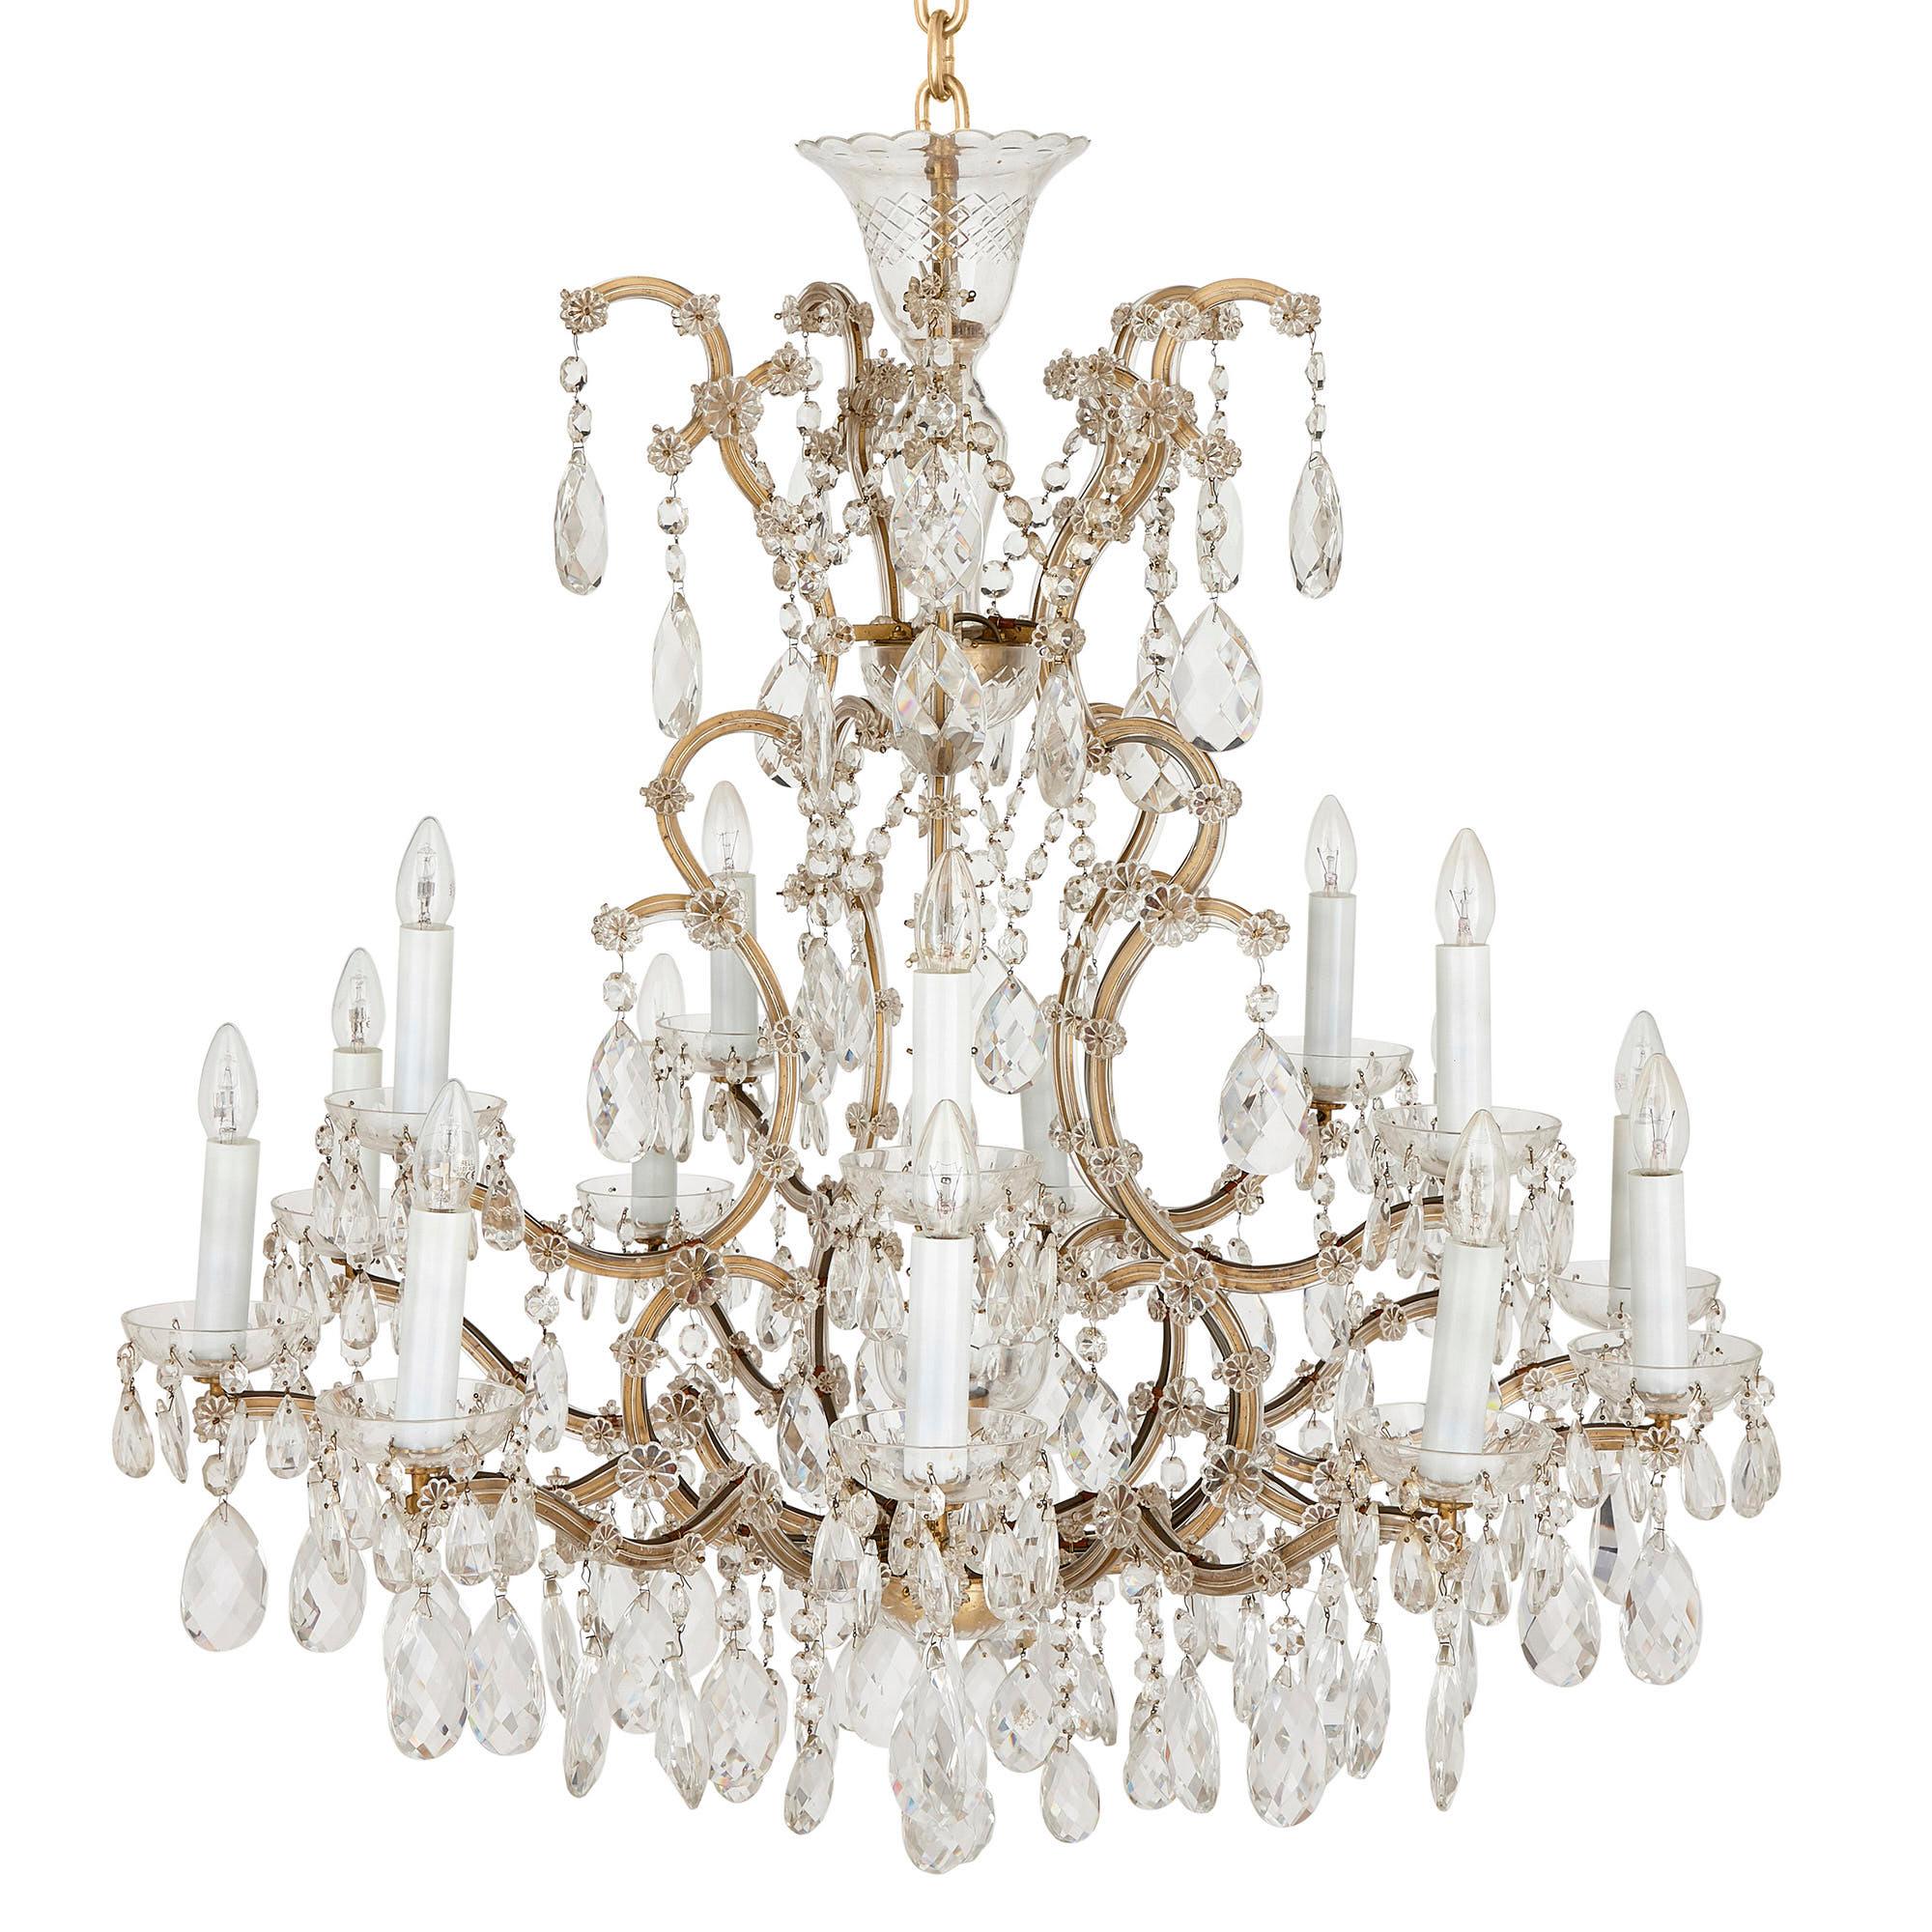 Bohemian Facet Cut Glass Rococo Style Chandelier For Sale